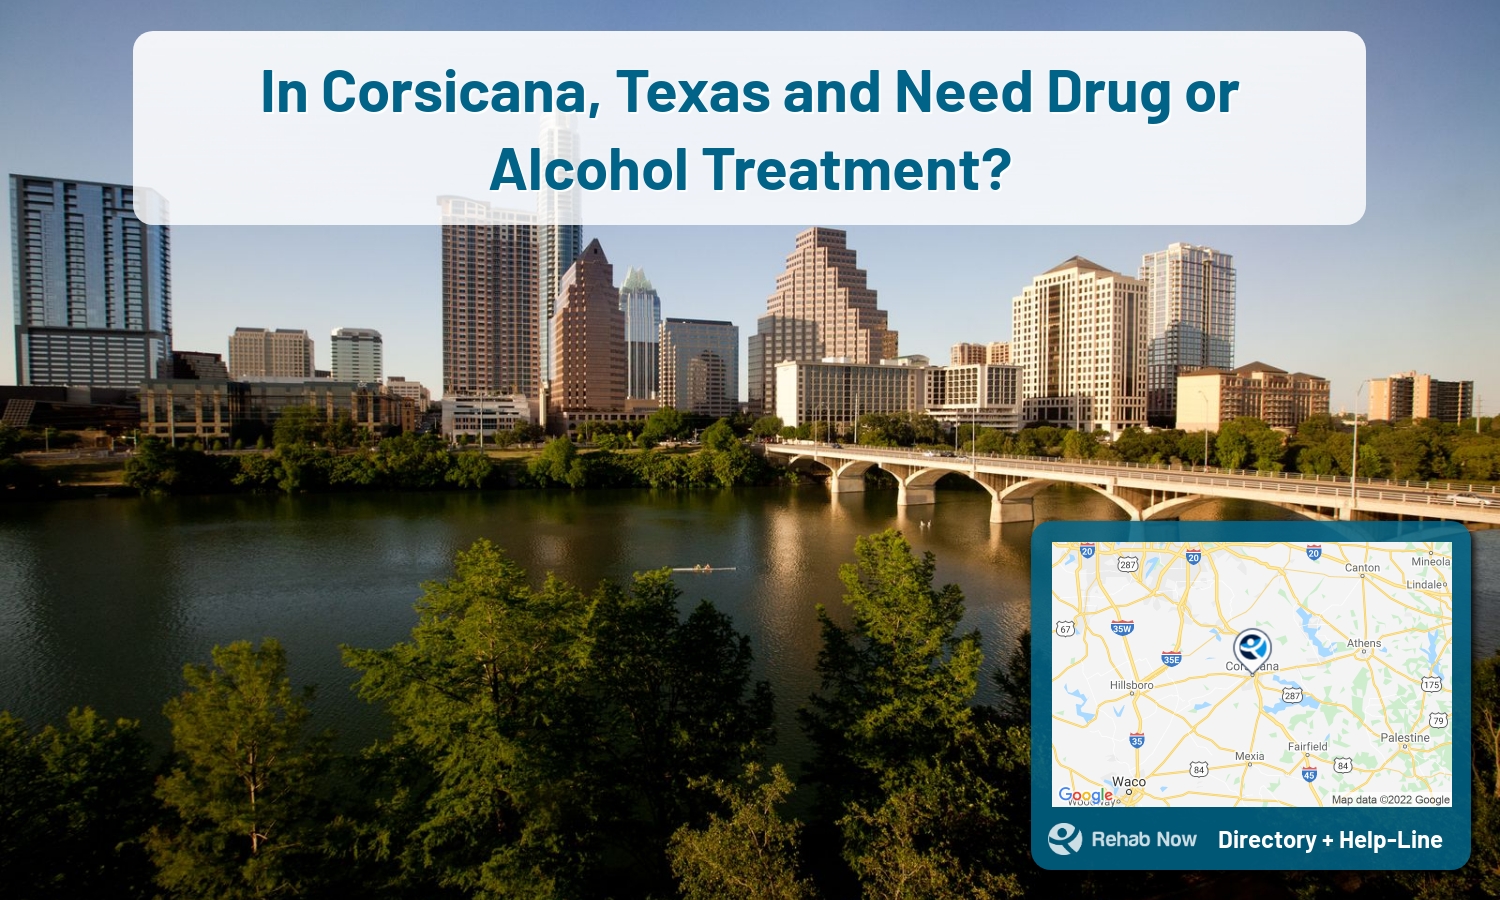 Let our expert counselors help find the best addiction treatment in Corsicana, Texas for you or a loved one now with a free call to our hotline.